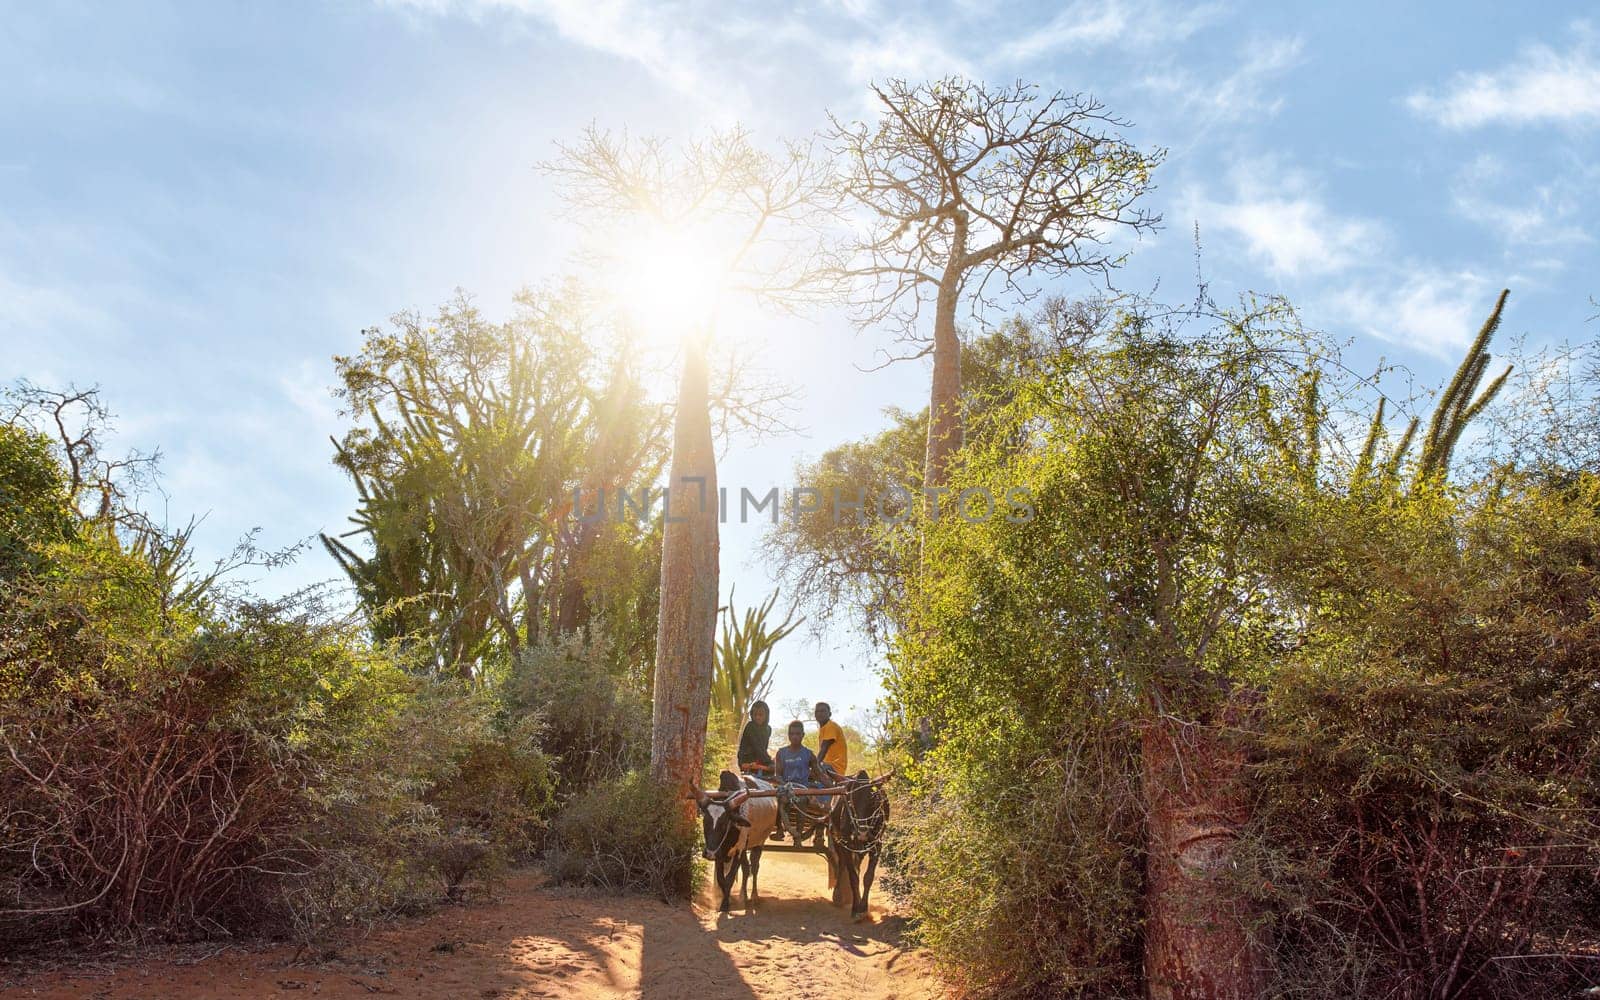 Ifaty, Madagascar - May 01, 2019: Wooden cart pulled by zebu cattle with three unknown Malagasy men going near baobab, octopus trees, and small bushes, strong sun backlight by Ivanko